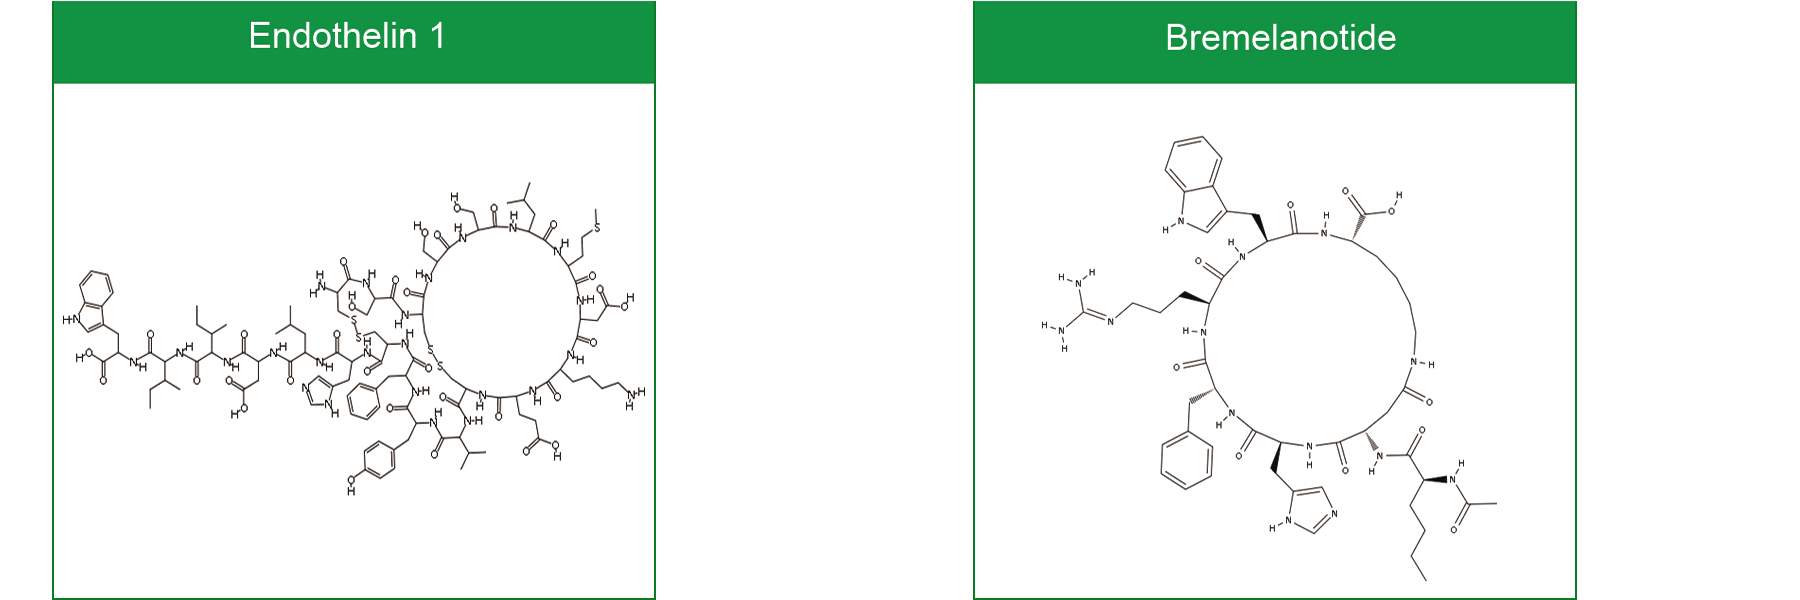 cyclic peptide synthesis